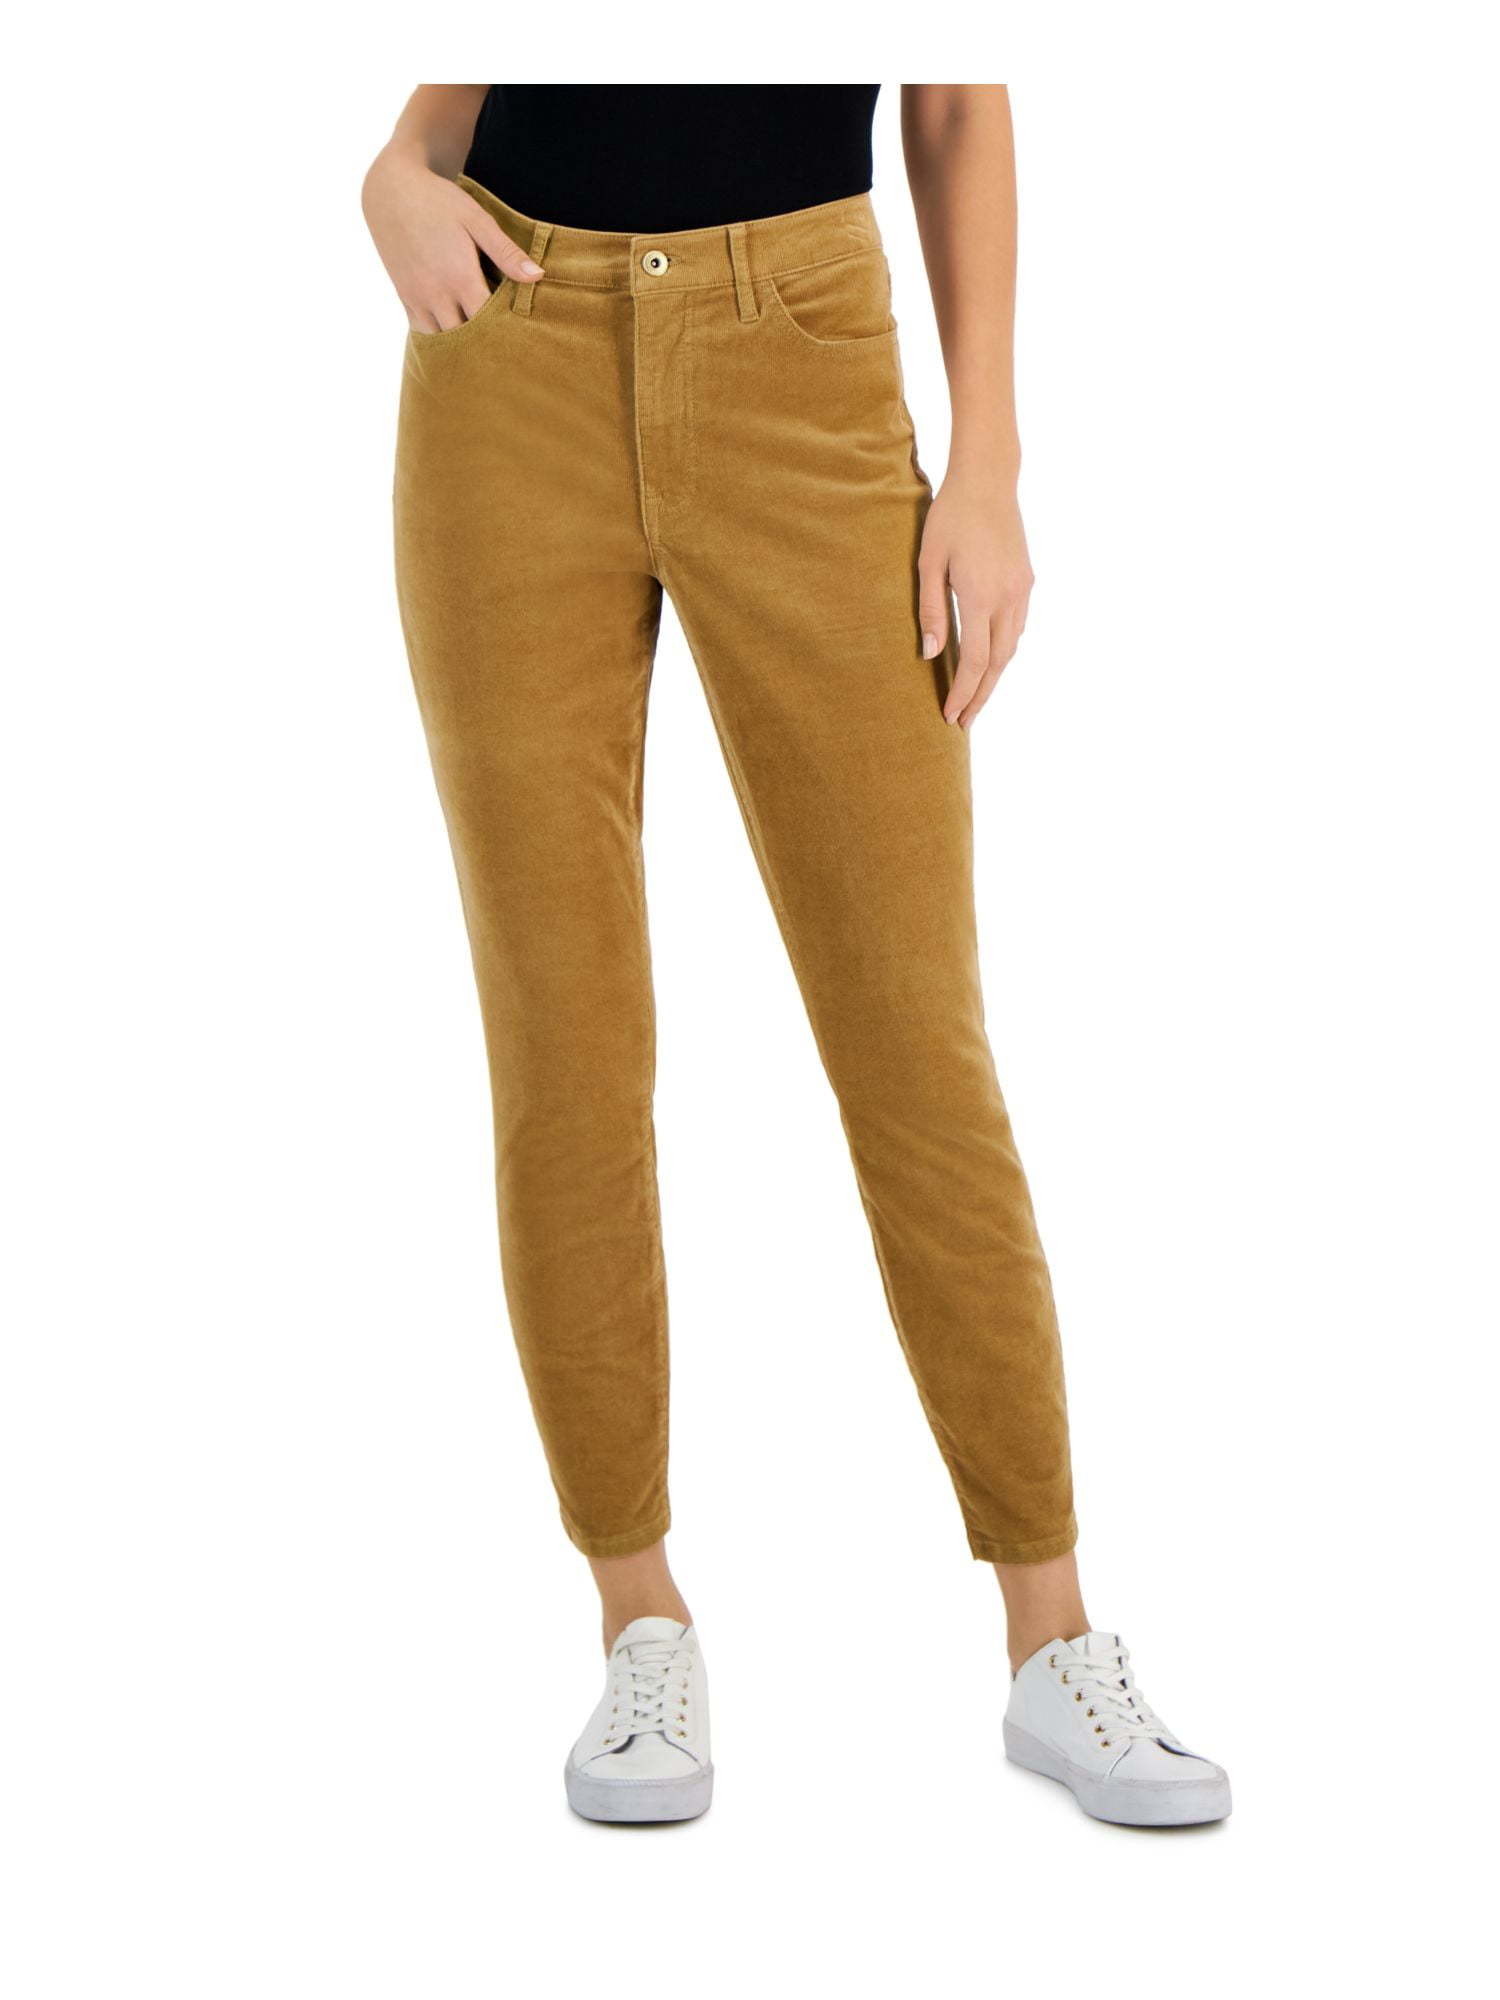 Women's Pocketed Pants